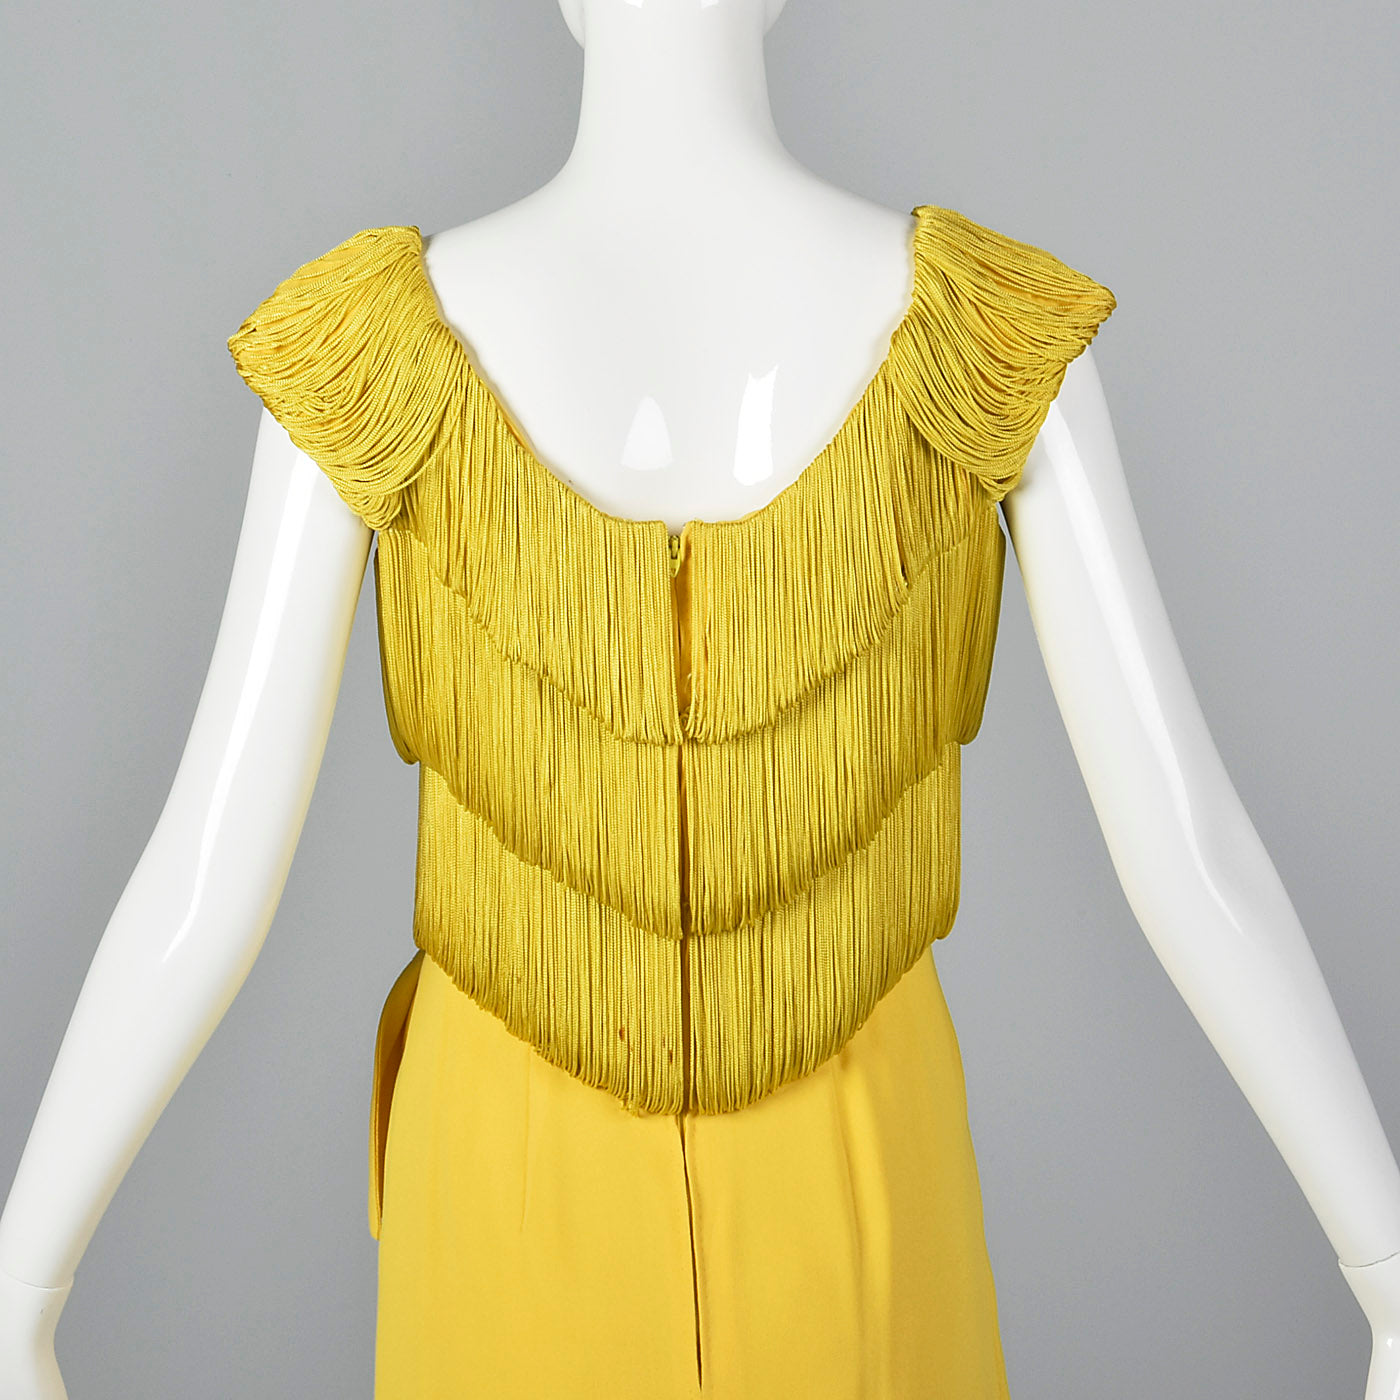 1960s Bright Yellow Cocktail Dress with Fringe Bodice